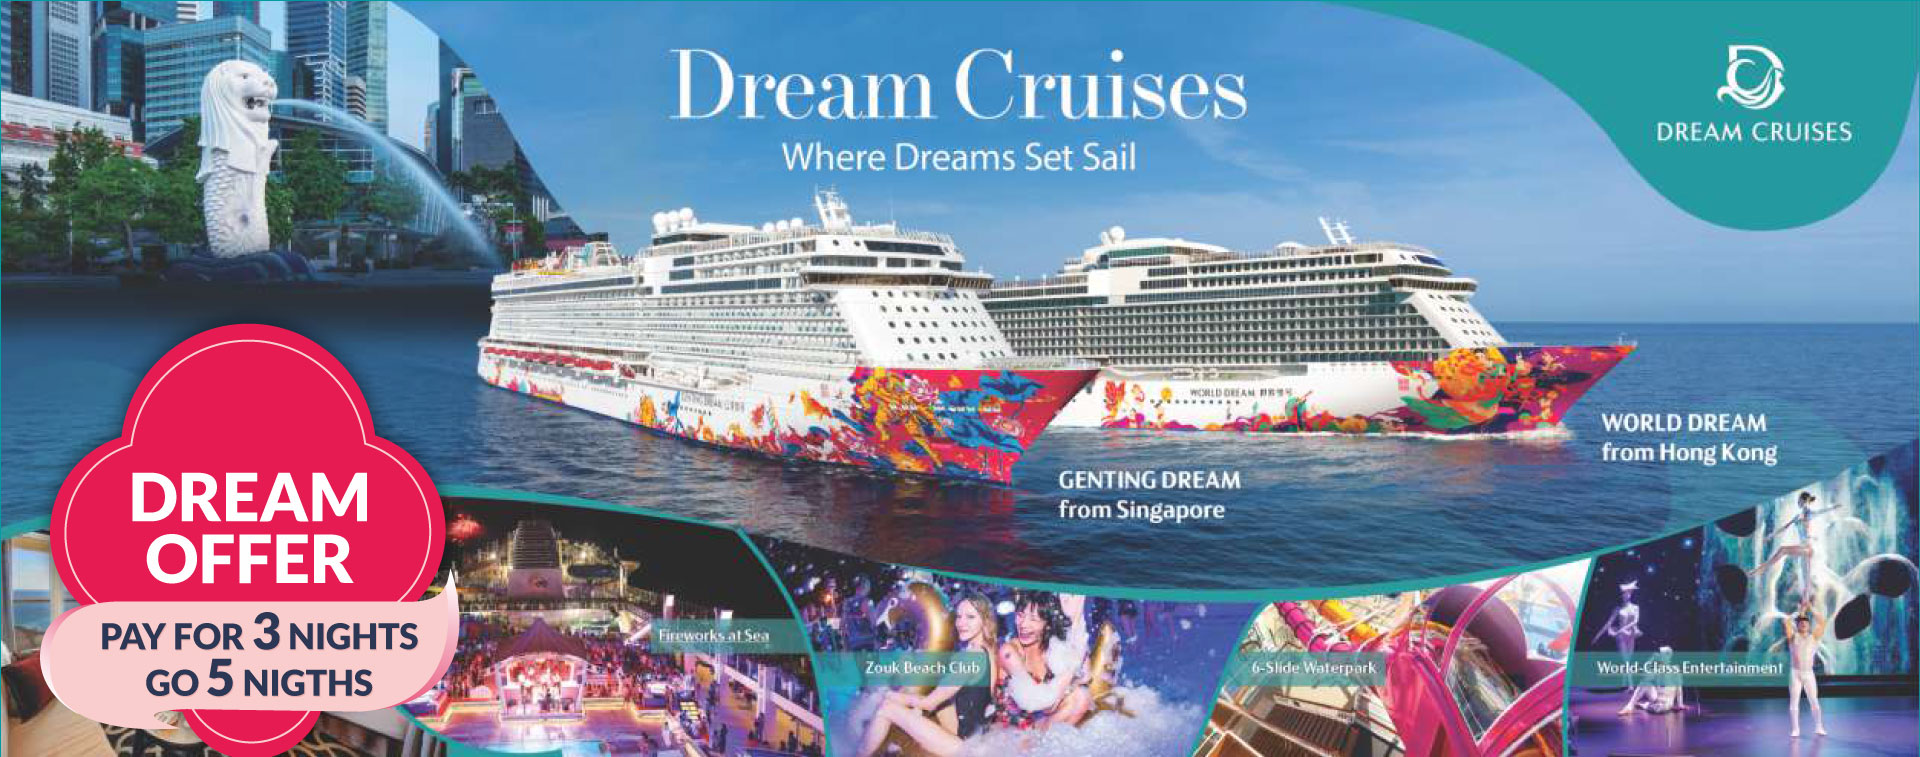 dream cruise online booking